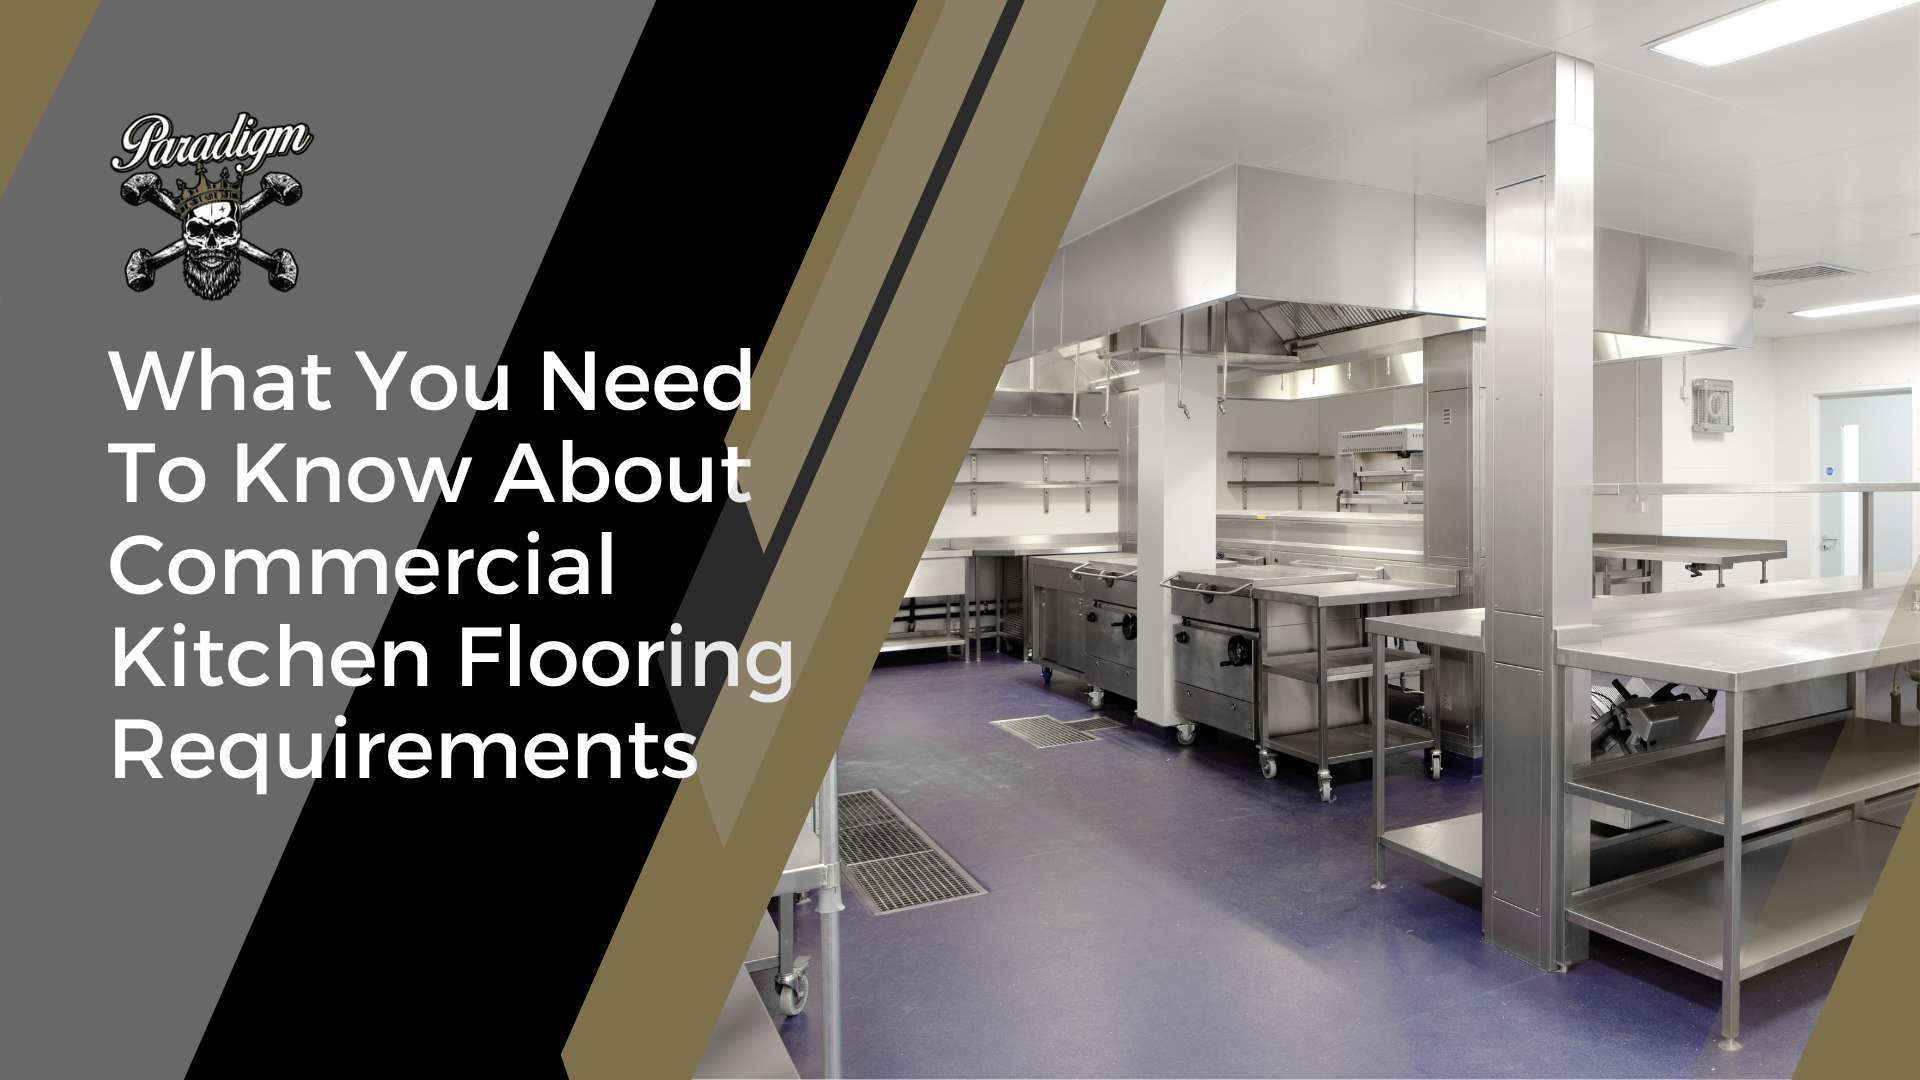 What You Need To Know About Commercial Kitchen Flooring Requirements